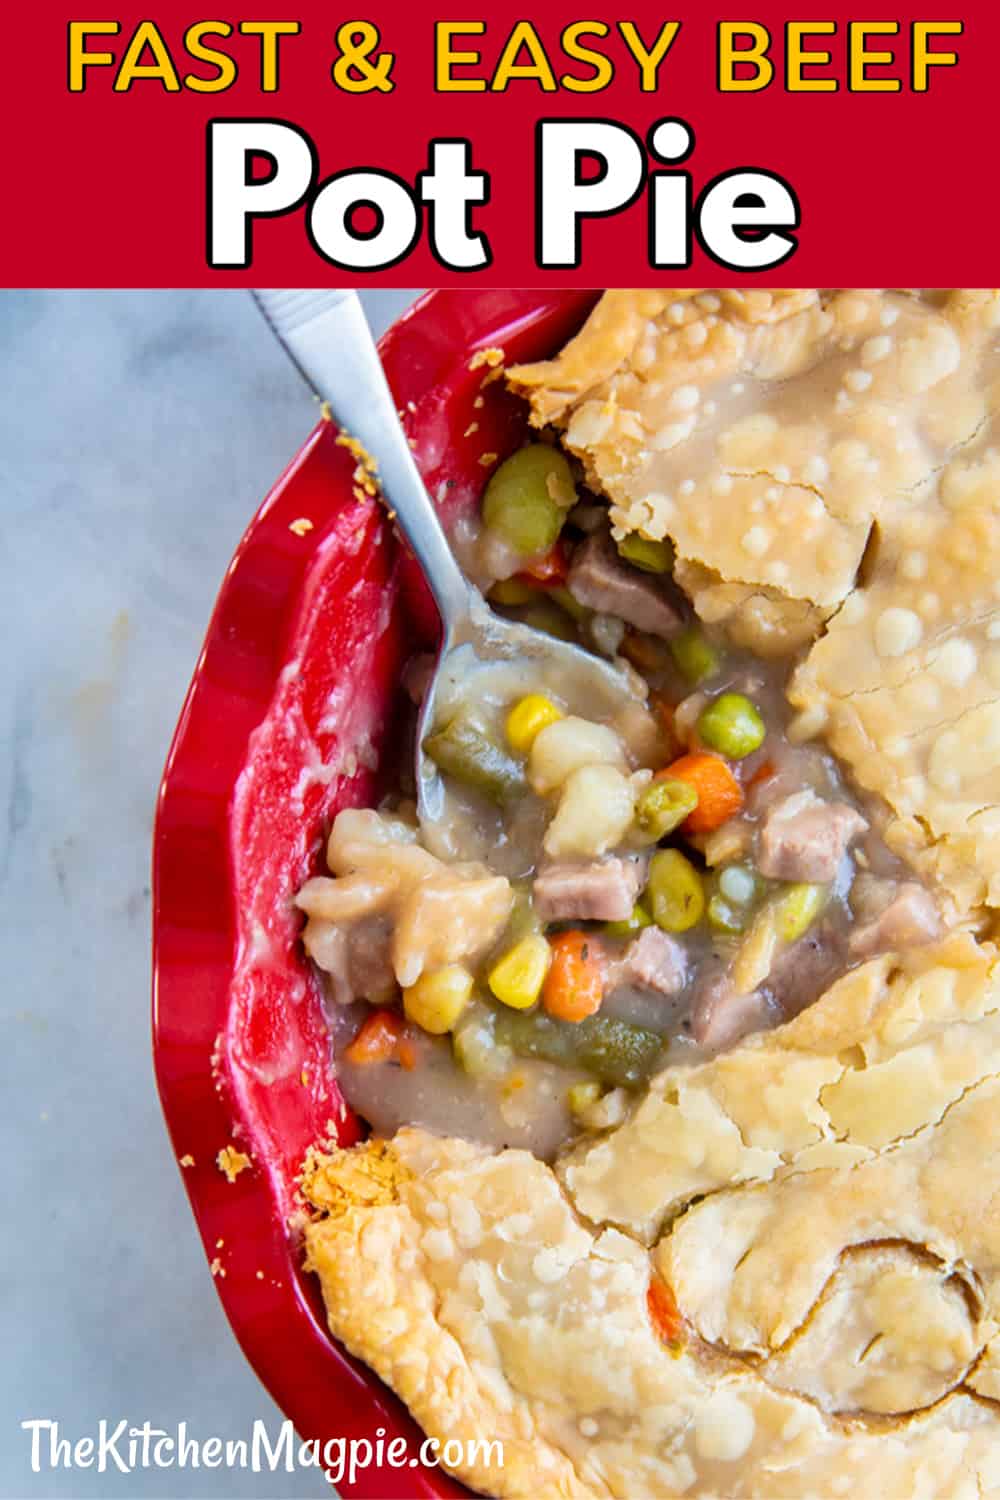 Beef pot pie is so often overlooked, but it is the best way to use up leftover roast beef! This pot pie has a flavorful gravy and is packed with beef, potatoes and vegetables! 